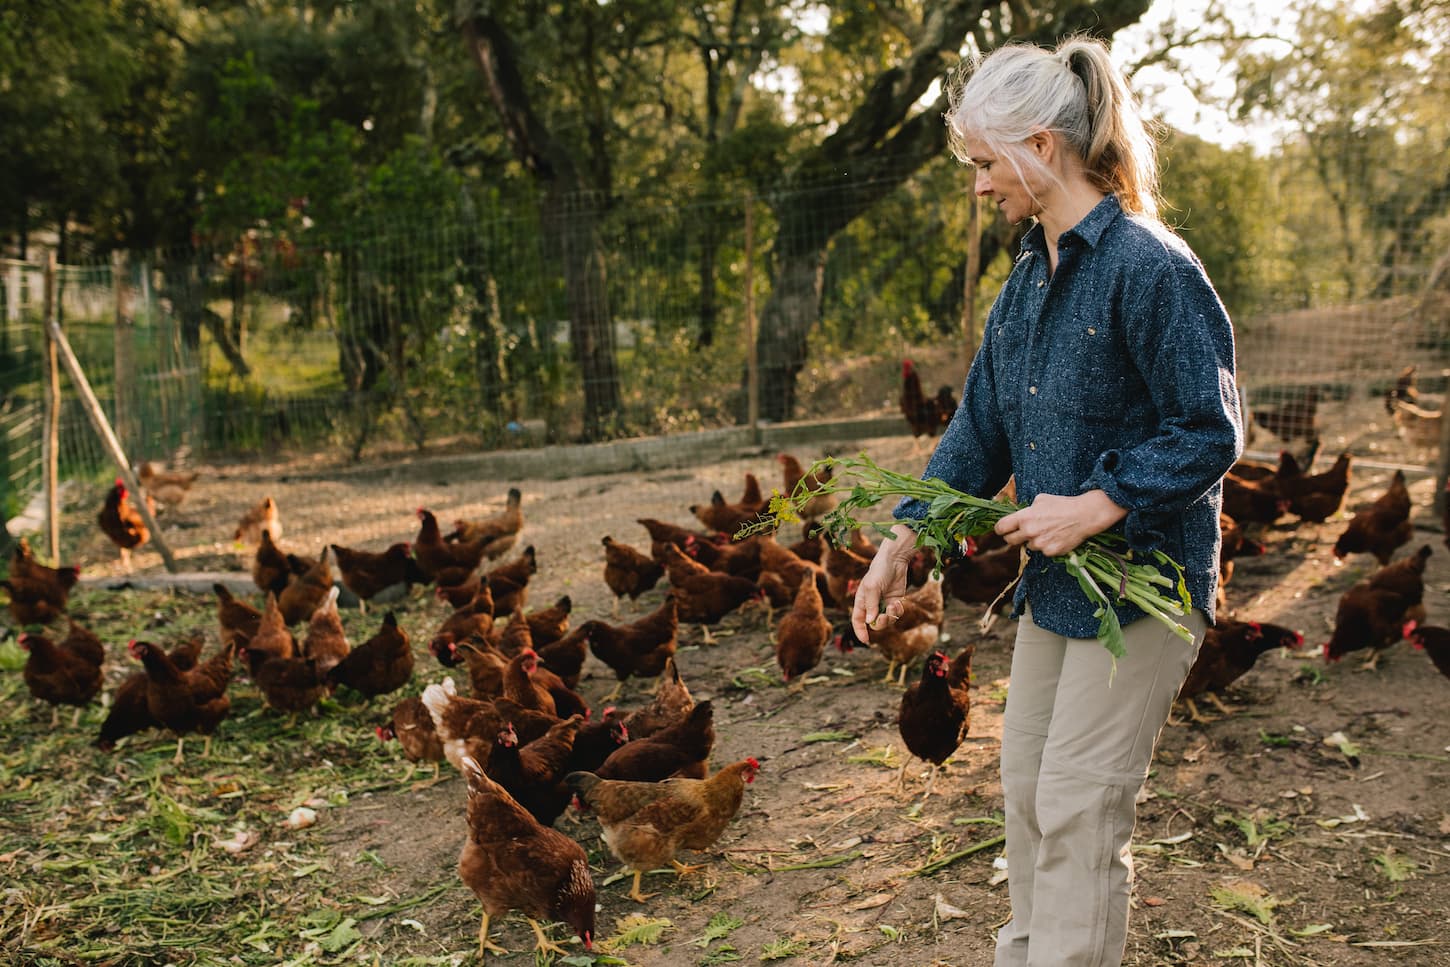 An image of a senior woman feeding chickens.